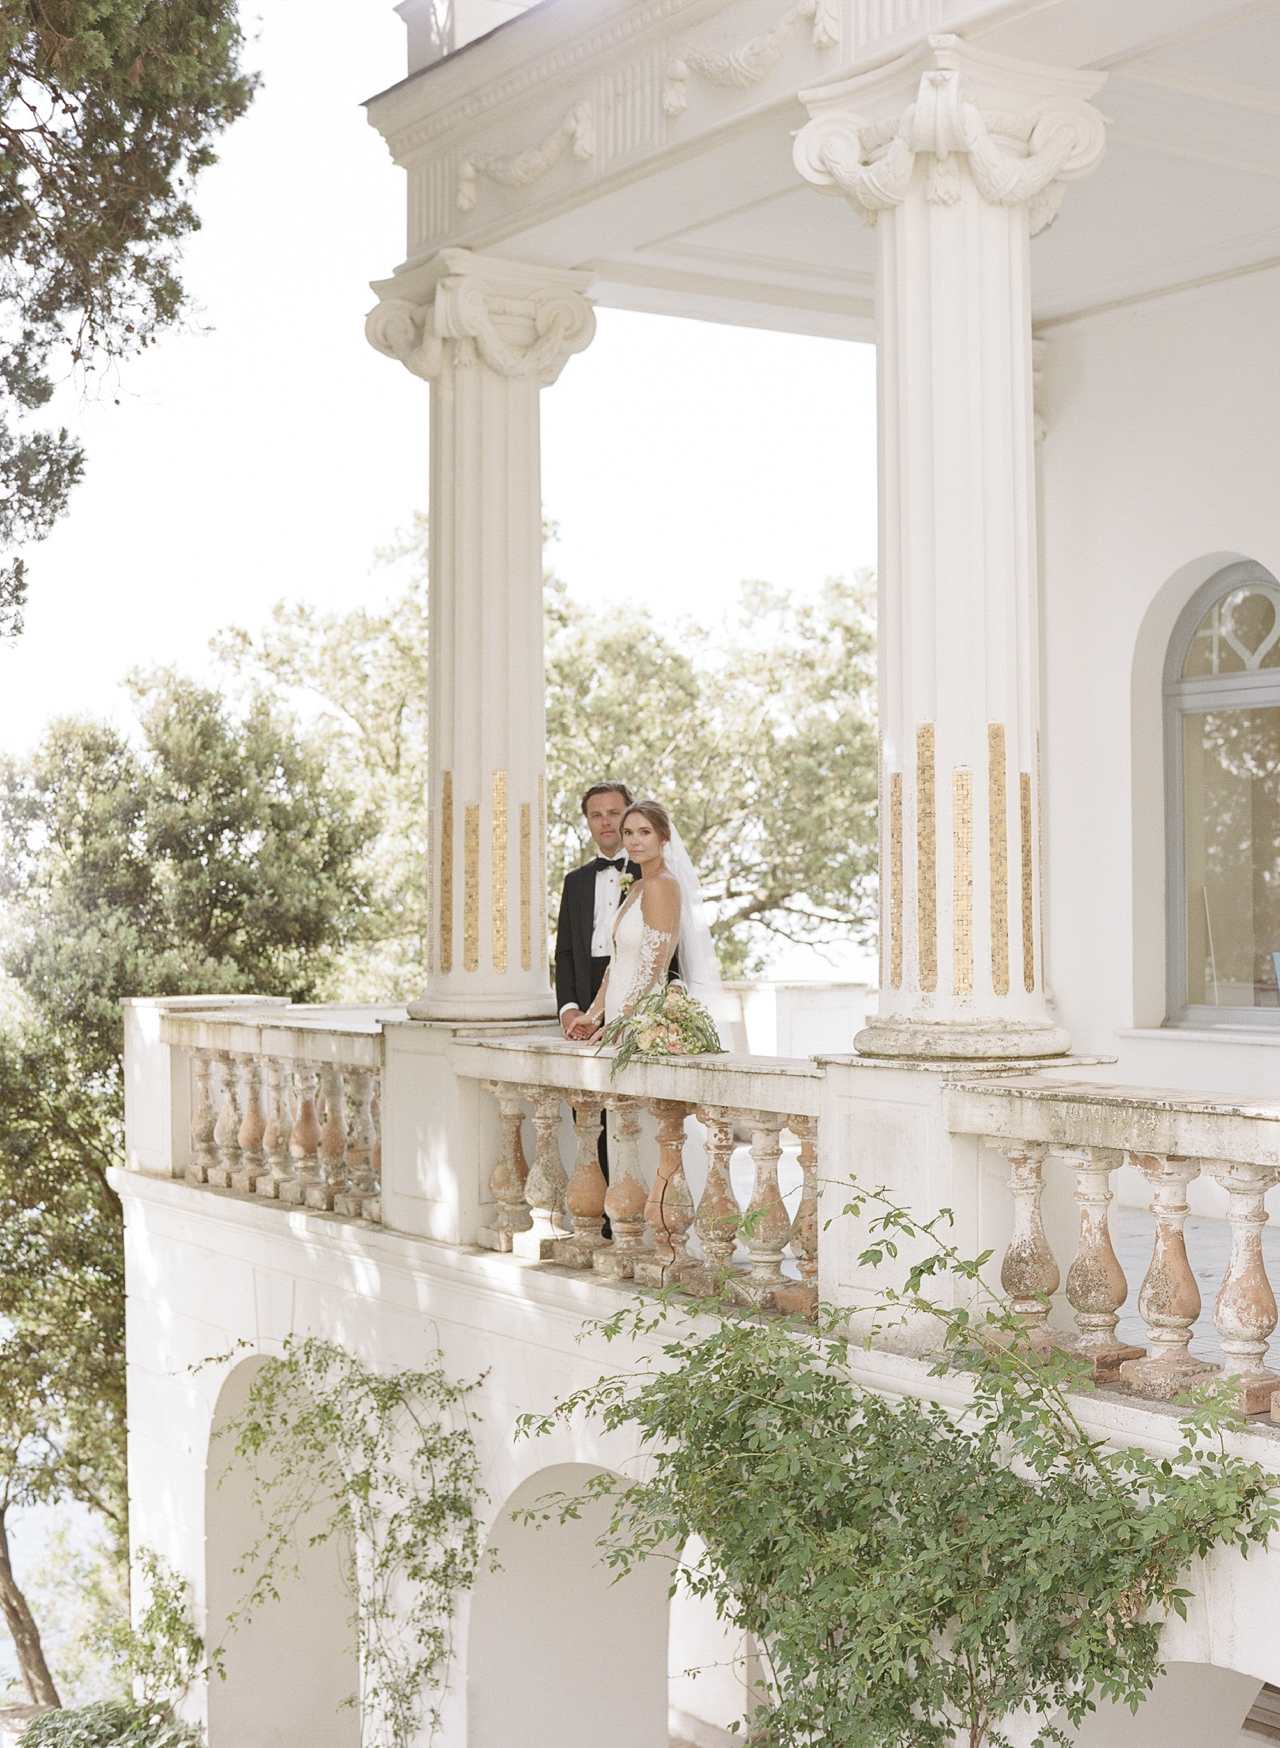 Discover a dream-like Capri luxury elopement with personalized details, breathtaking venues, and unforgettable moments